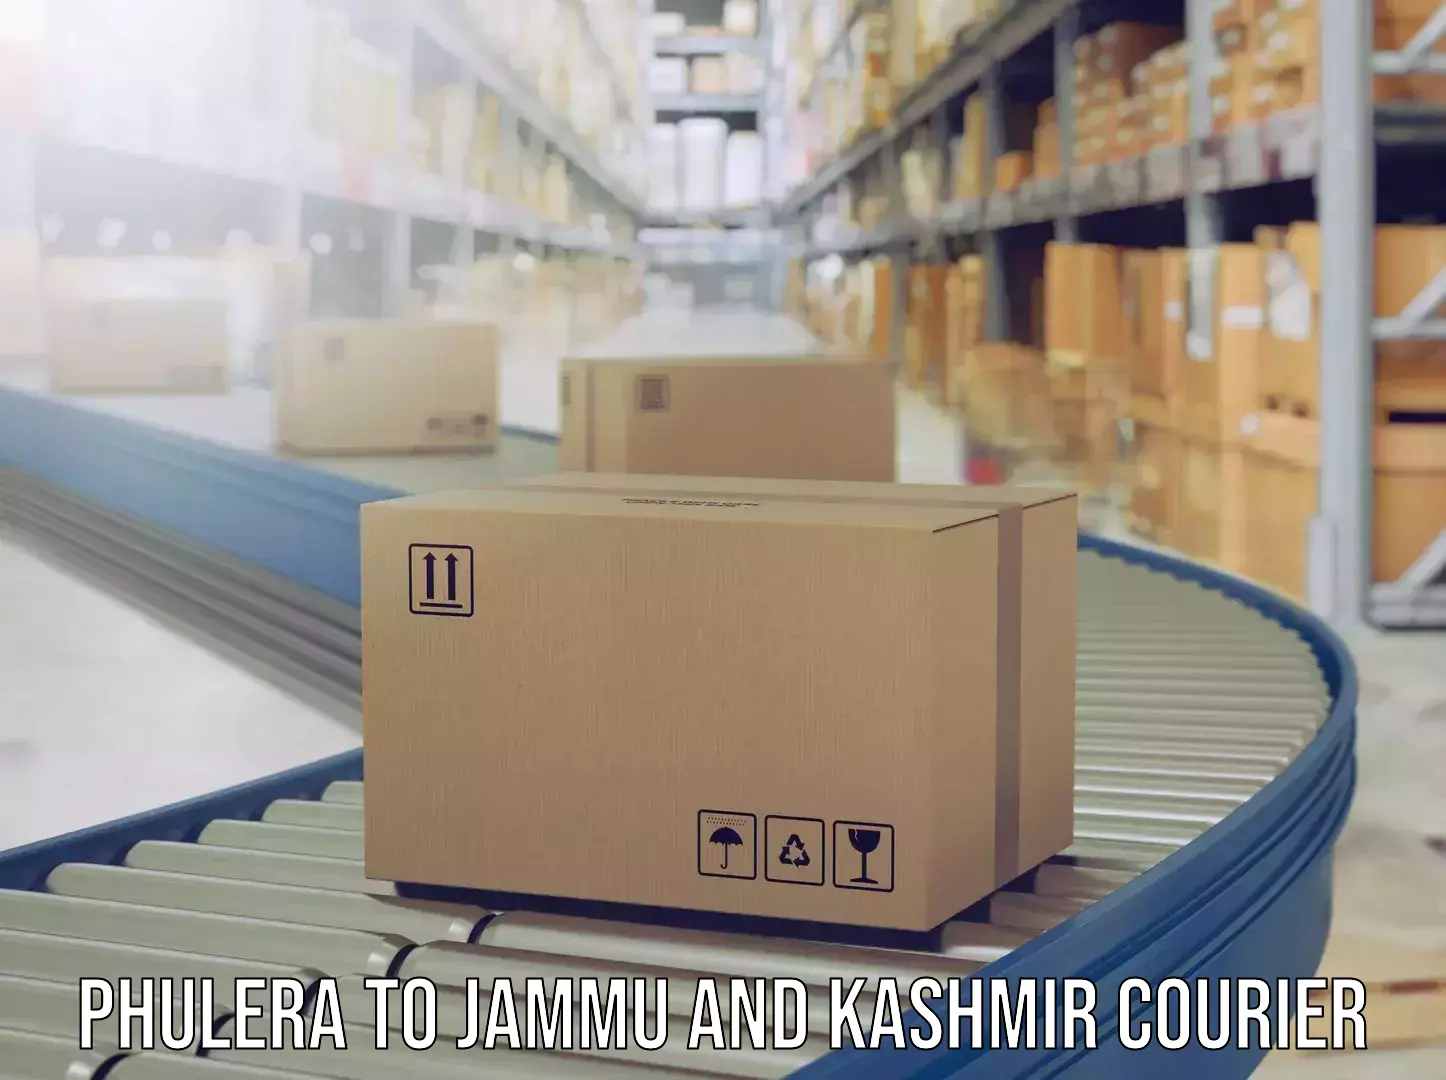 Baggage delivery management Phulera to Jammu and Kashmir